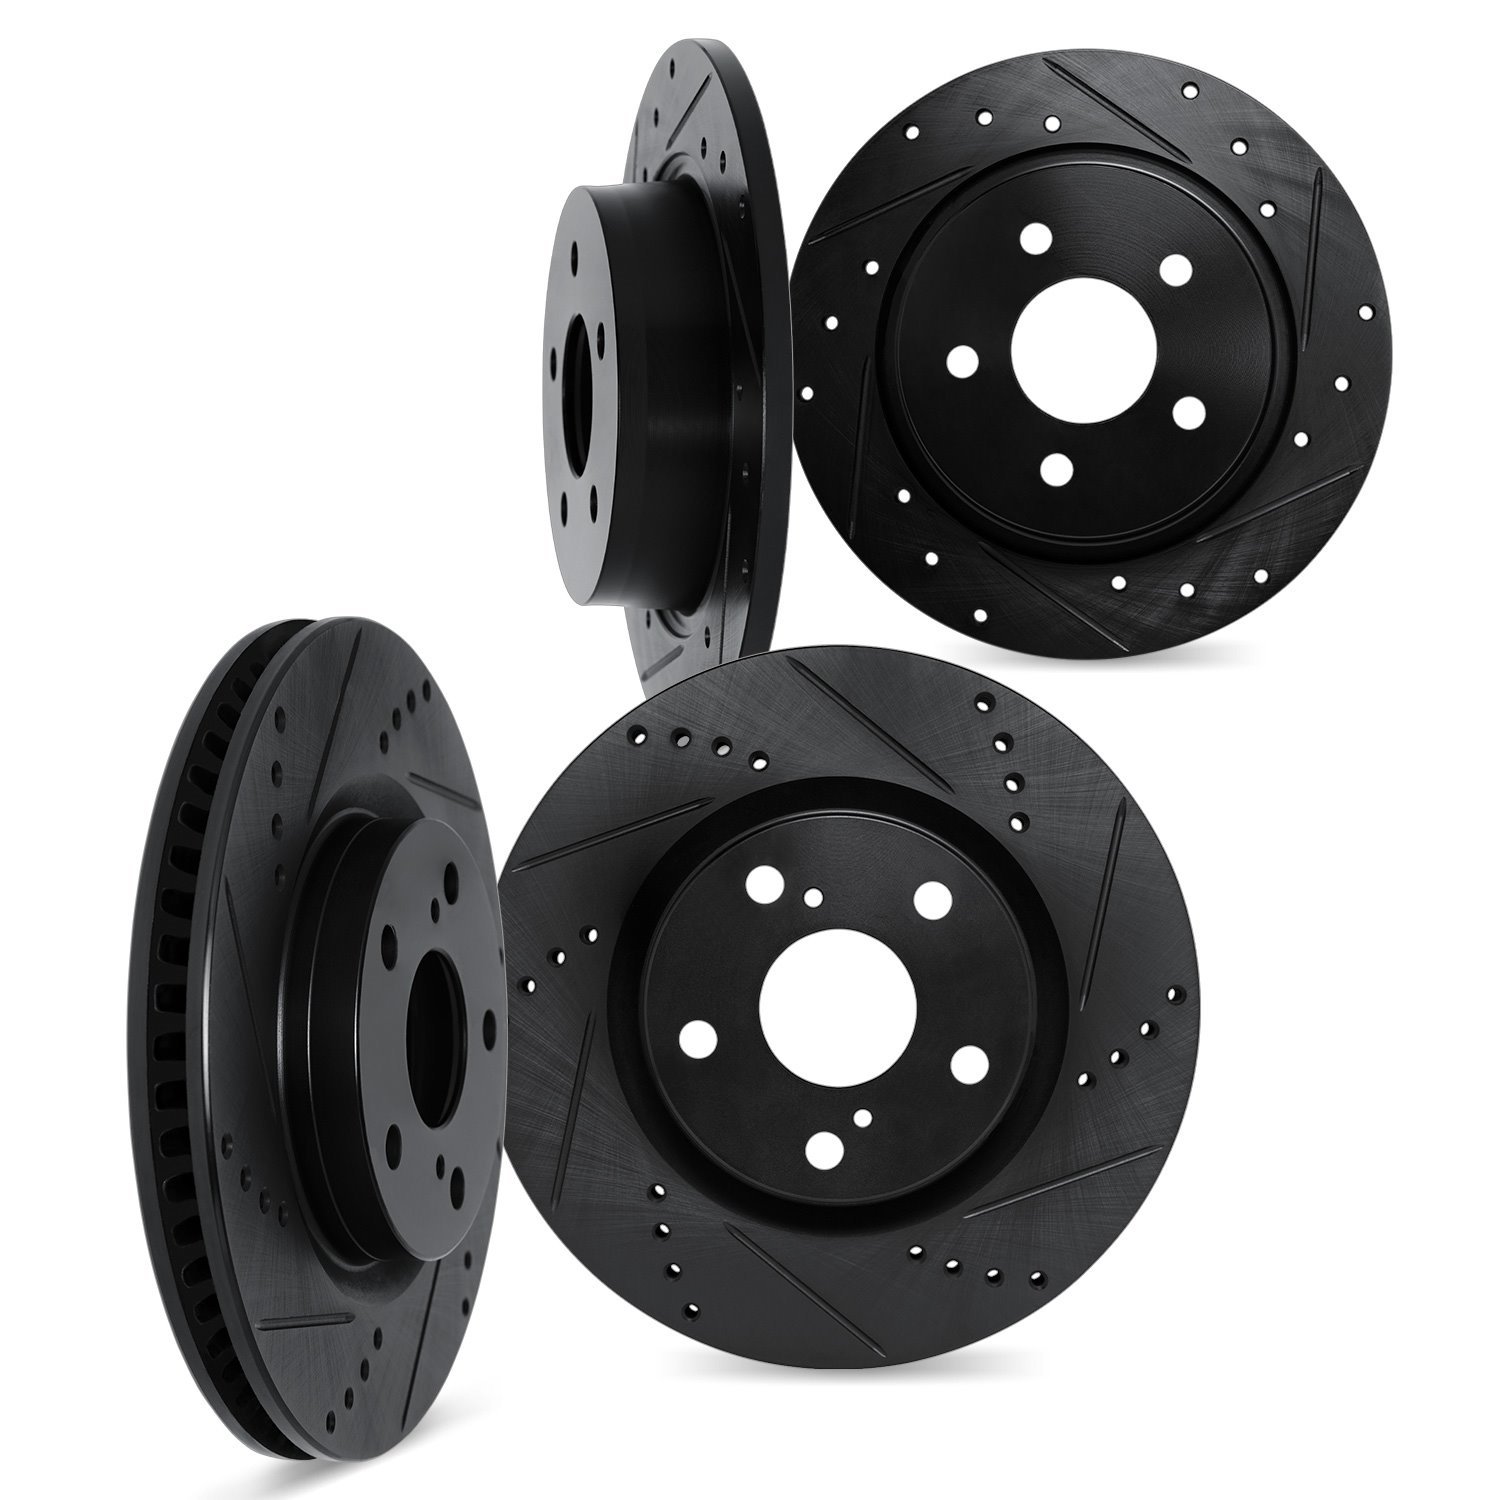 8004-32006 Drilled/Slotted Brake Rotors [Black], Fits Select Mini, Position: Front and Rear